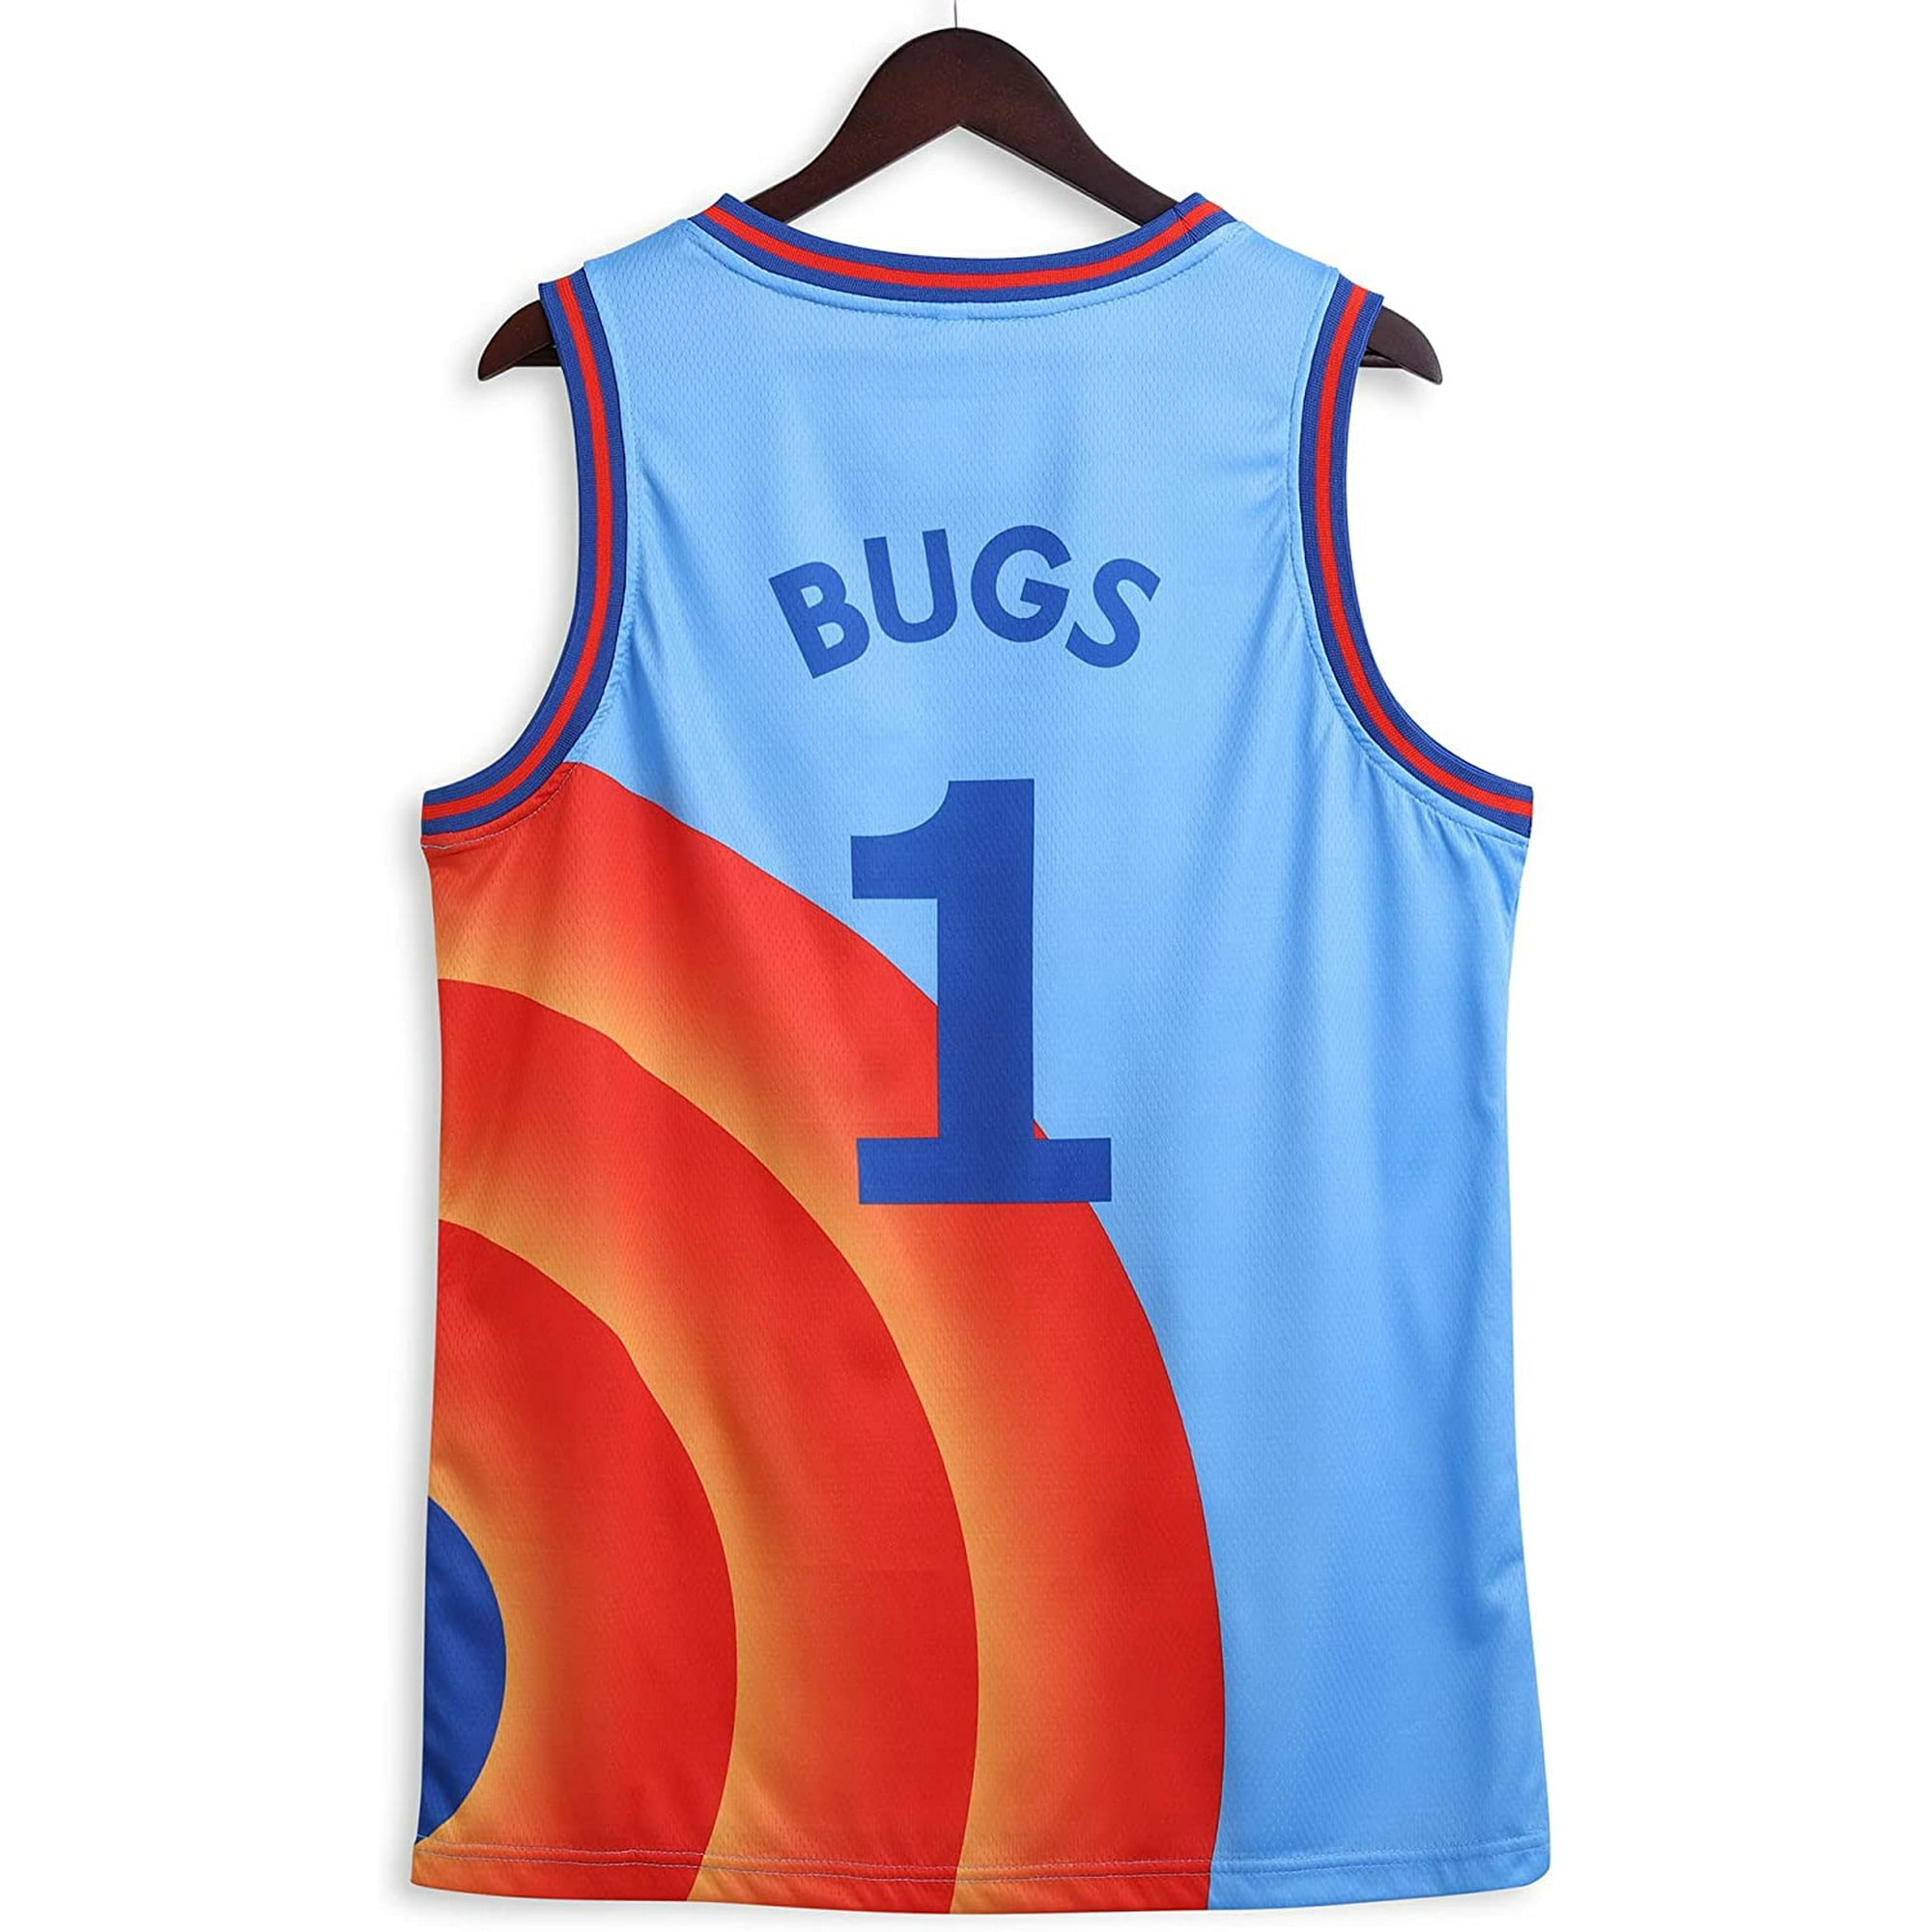 90s Basketball Jersey Shirt for Party, Space Movie #1#10 Jersey